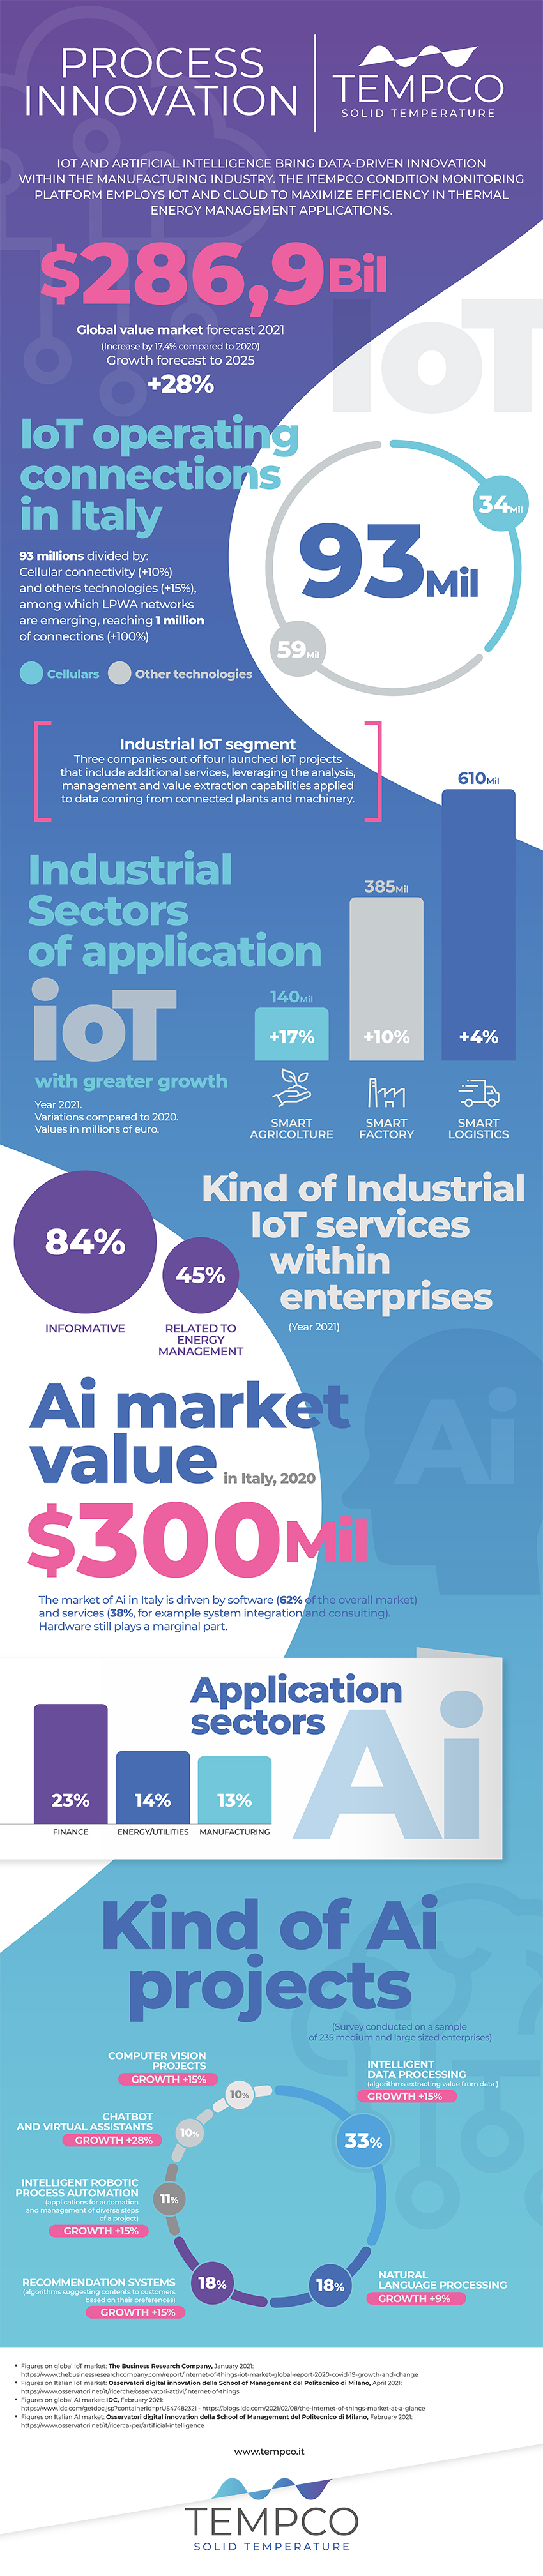 Tempco Infographic AI IoT industrial process innovation